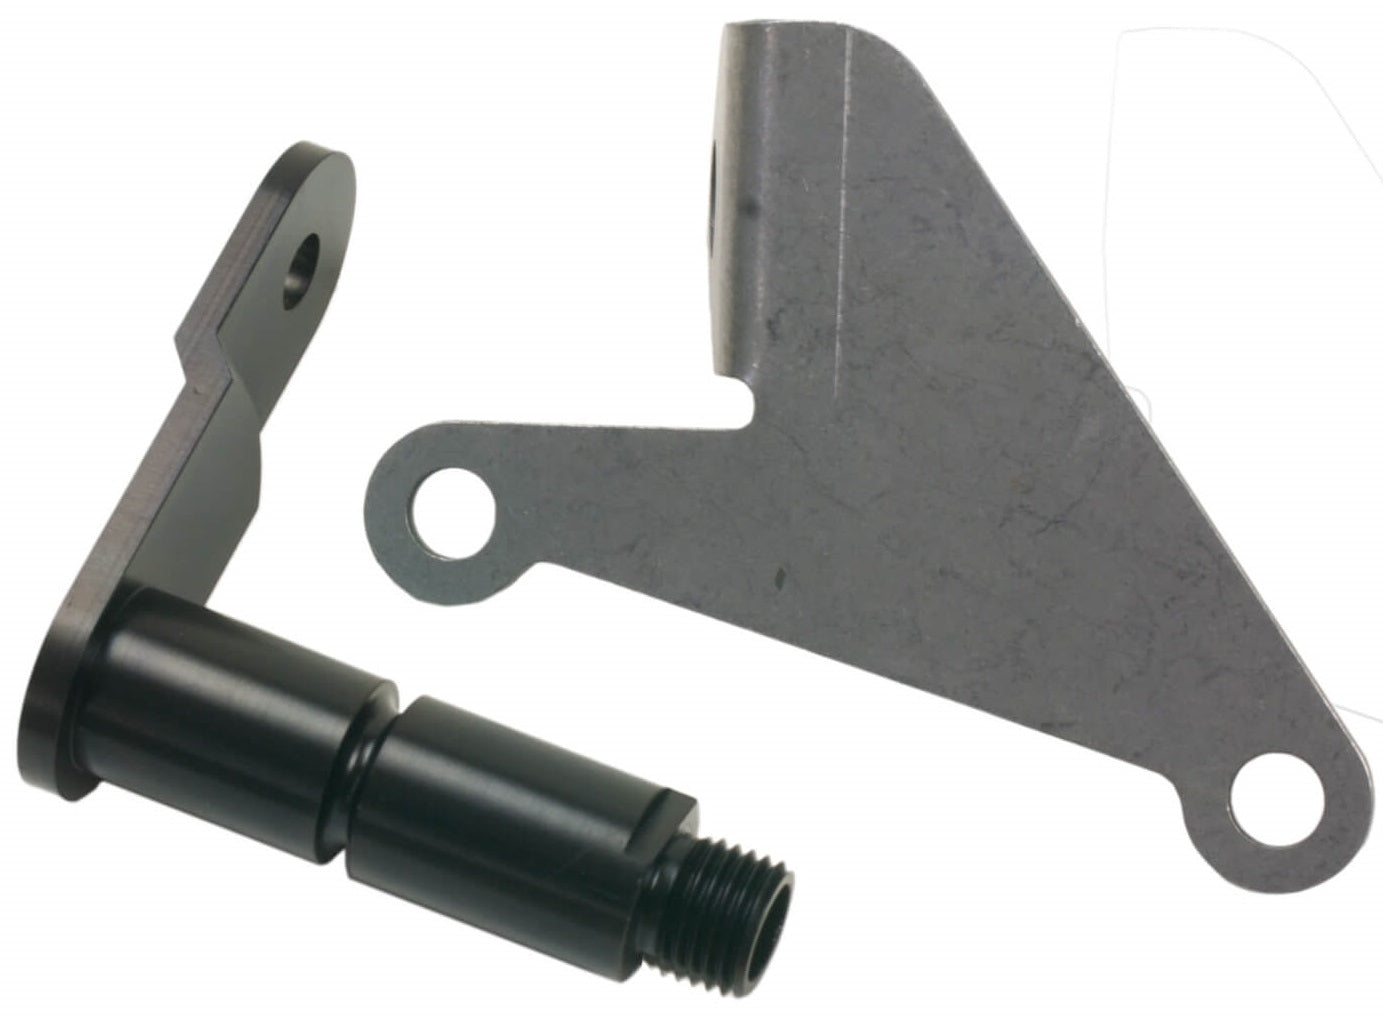 CABLE BRACKET & LEVER KIT,FORD AOD